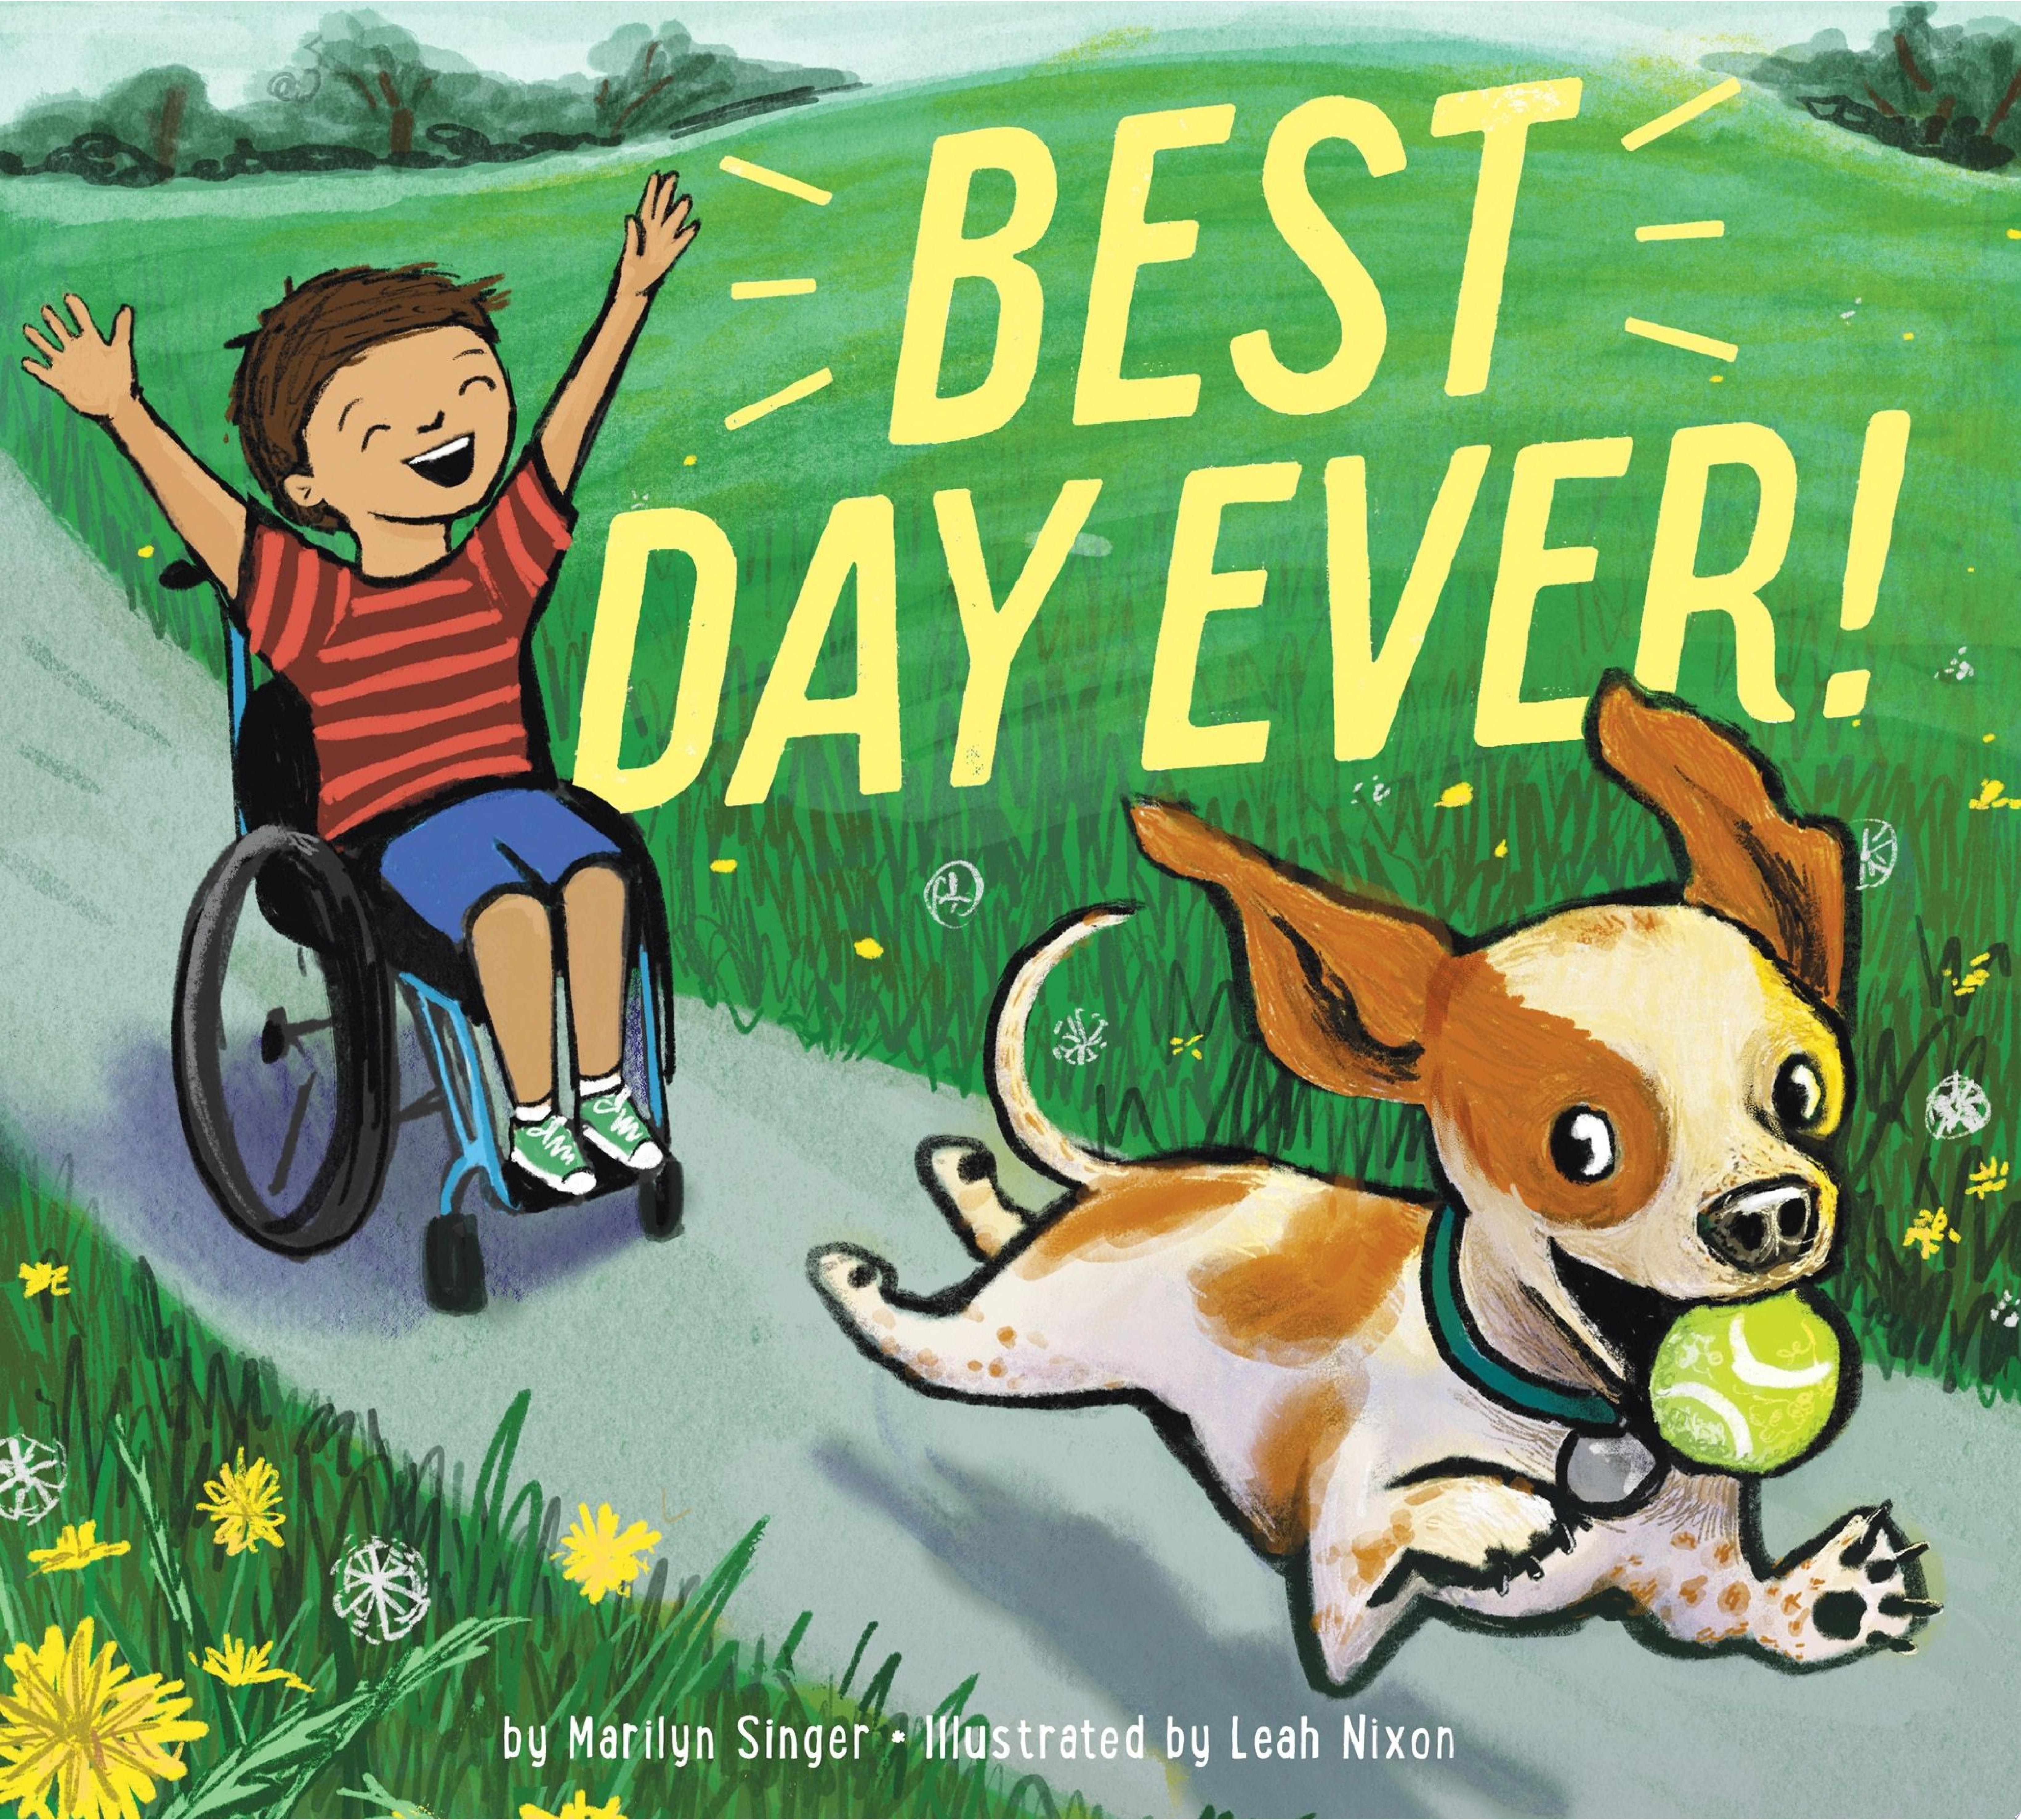 Image for "Best Day Ever!"